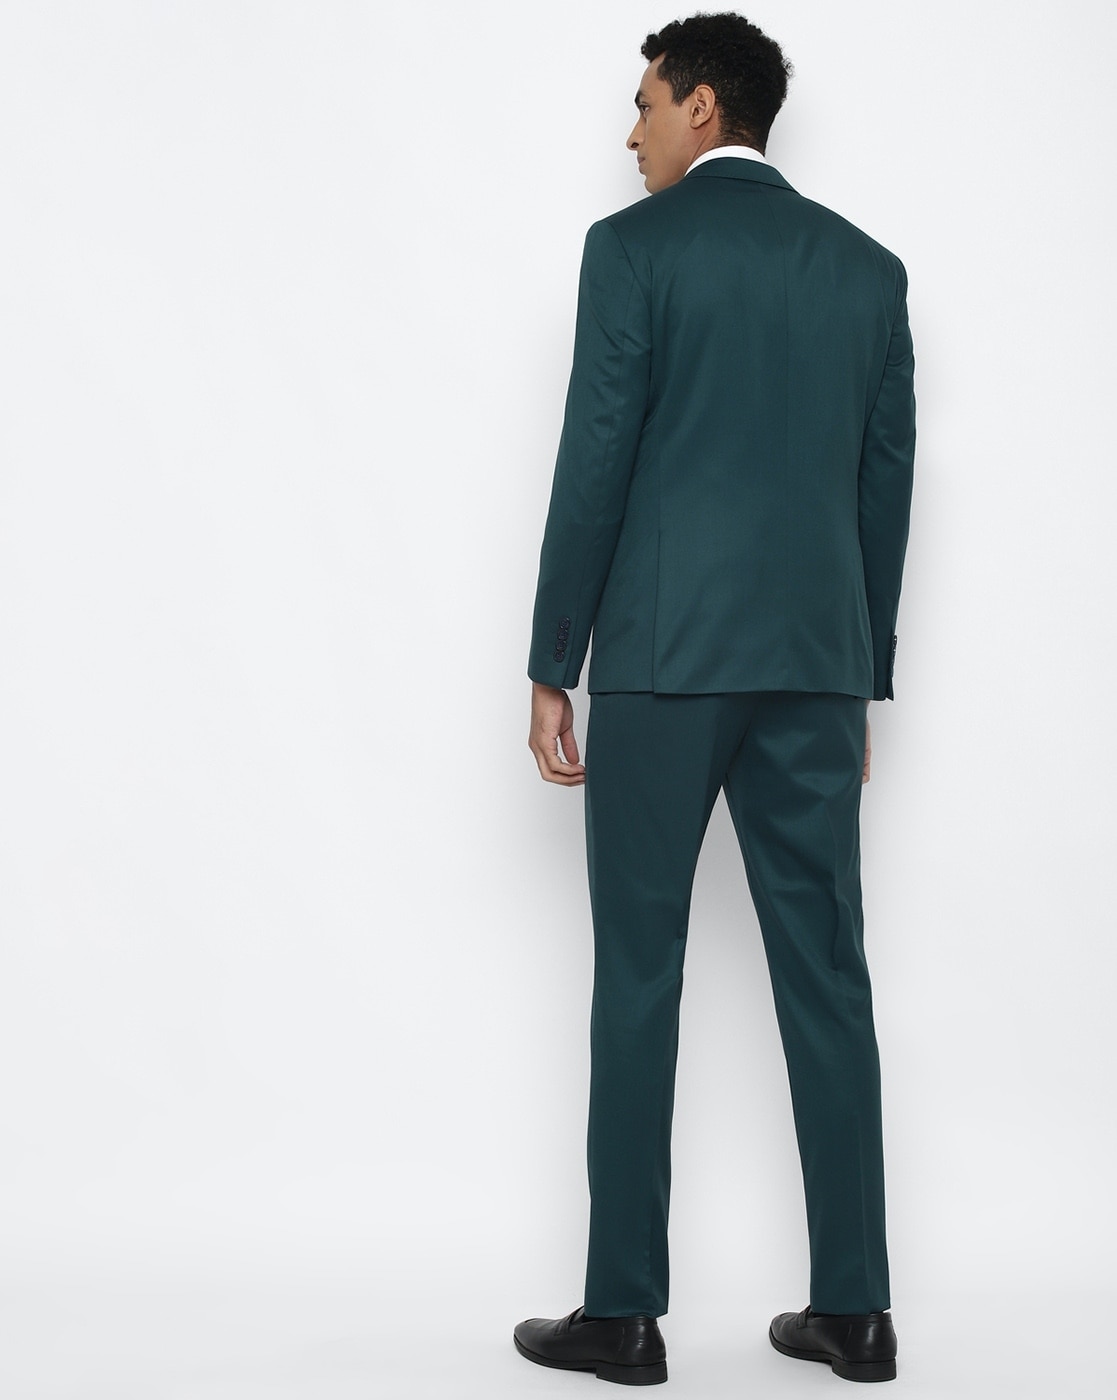 Green Three Piece Suit with Boots | Hockerty